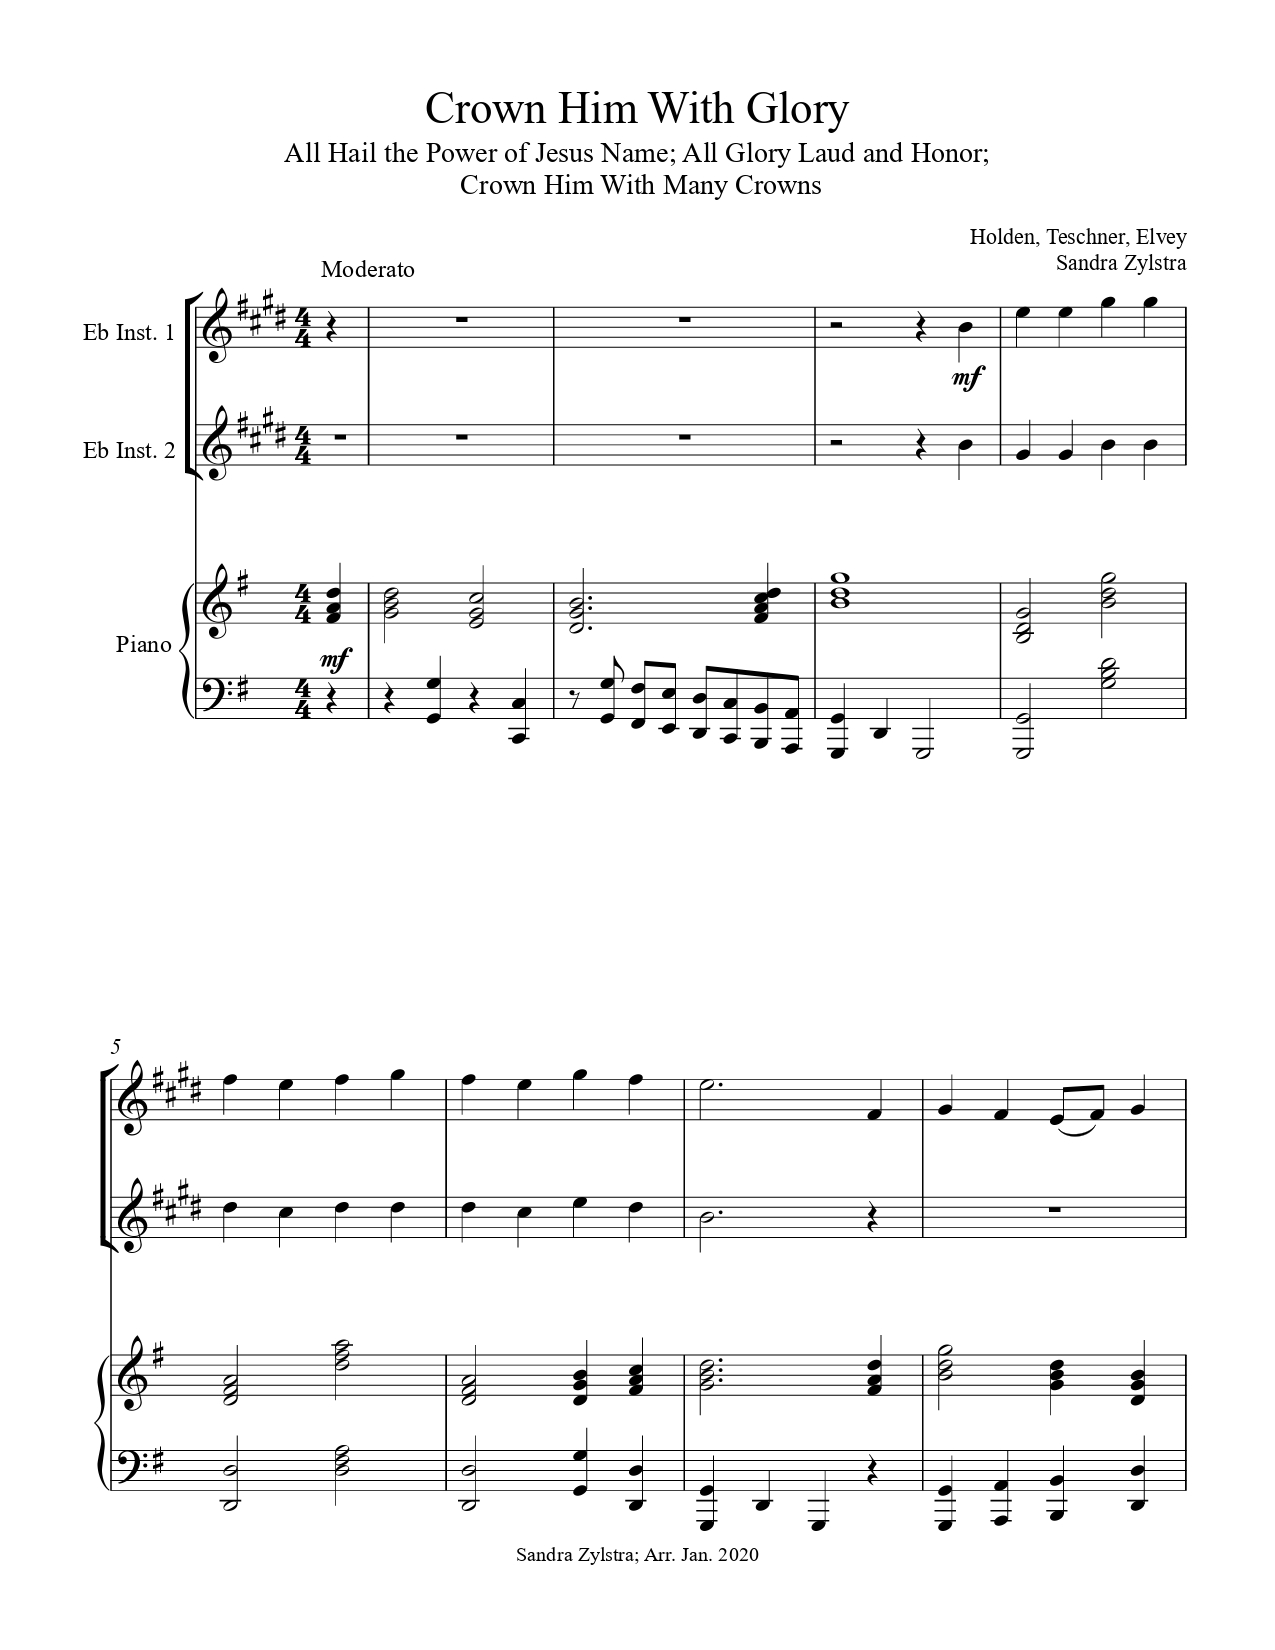 Crown Him With Glory Eb instrument duet parts cover page 00021